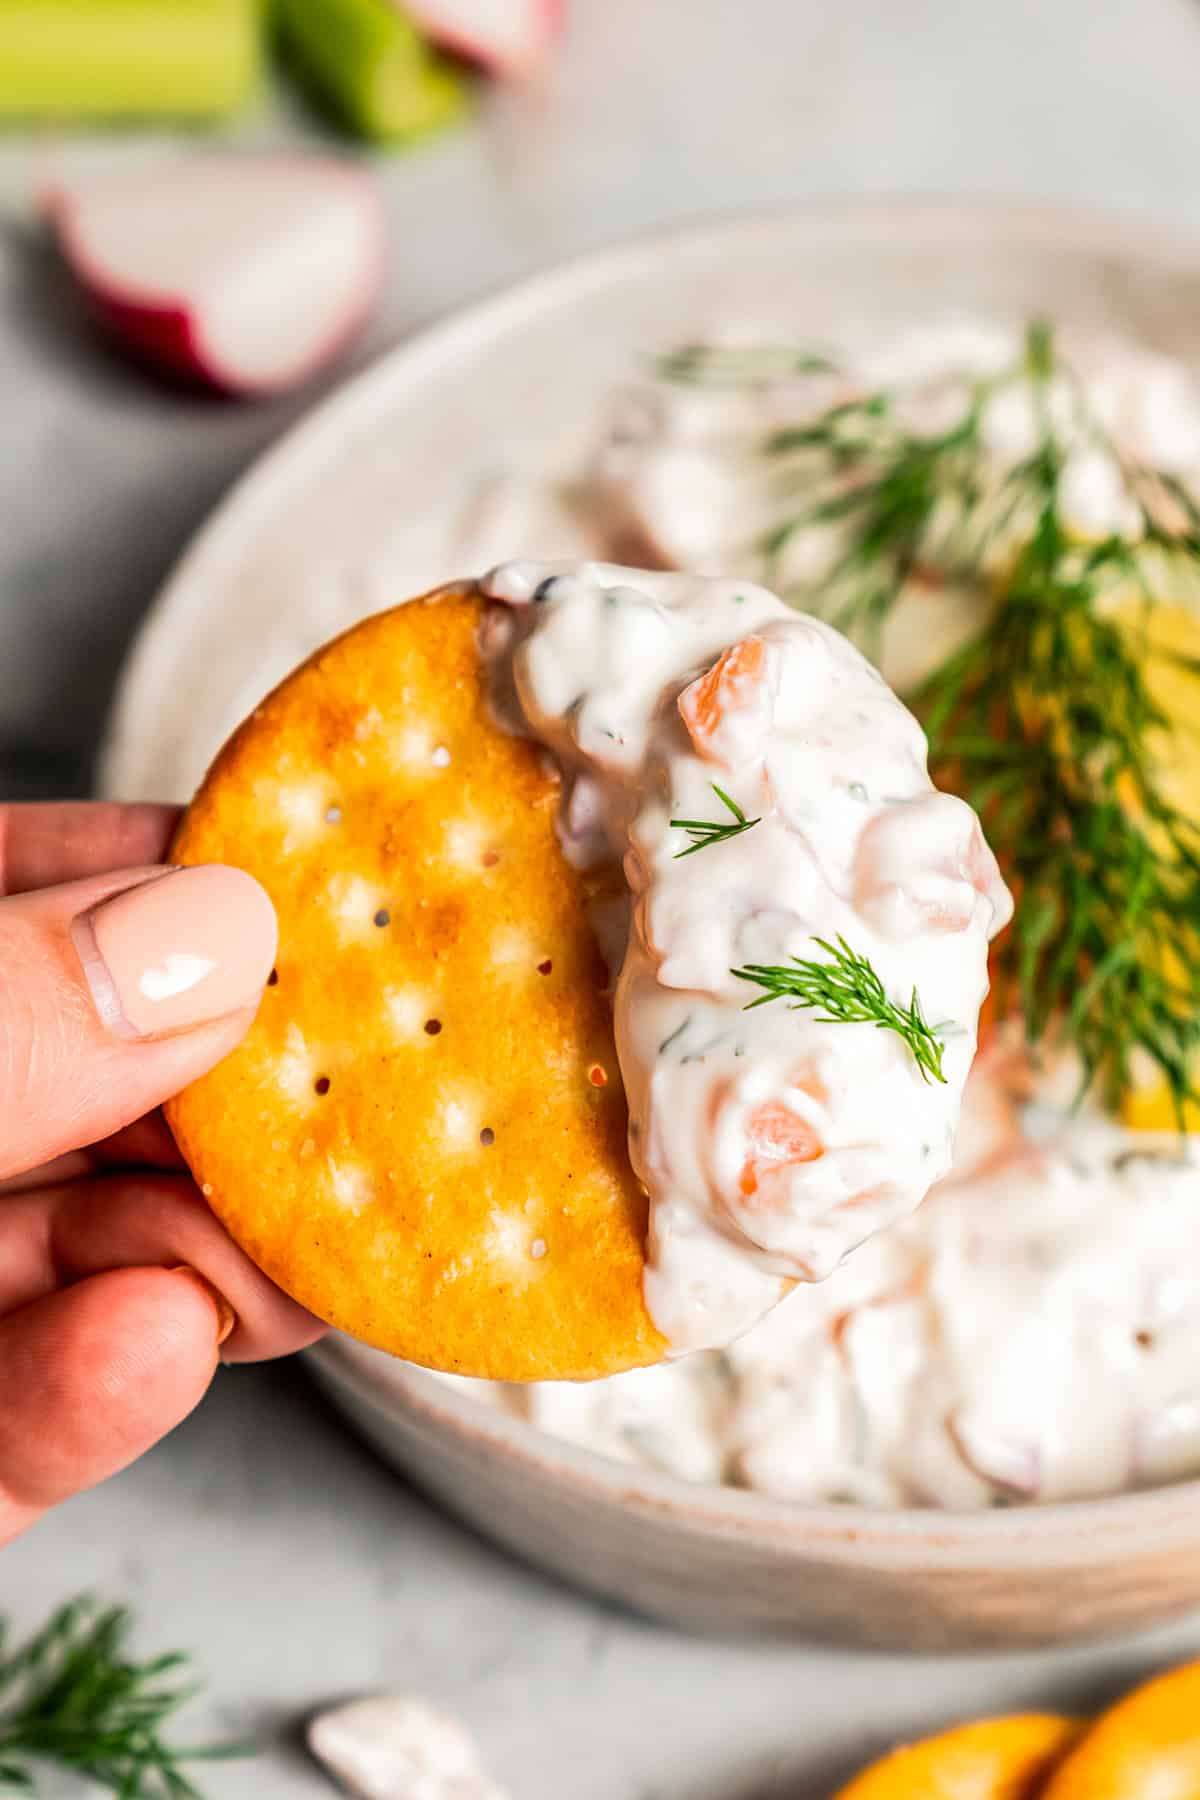 Close-up of a hand holding up a cracker dipped in smoked salmon dip with a bowl of dip in the background.